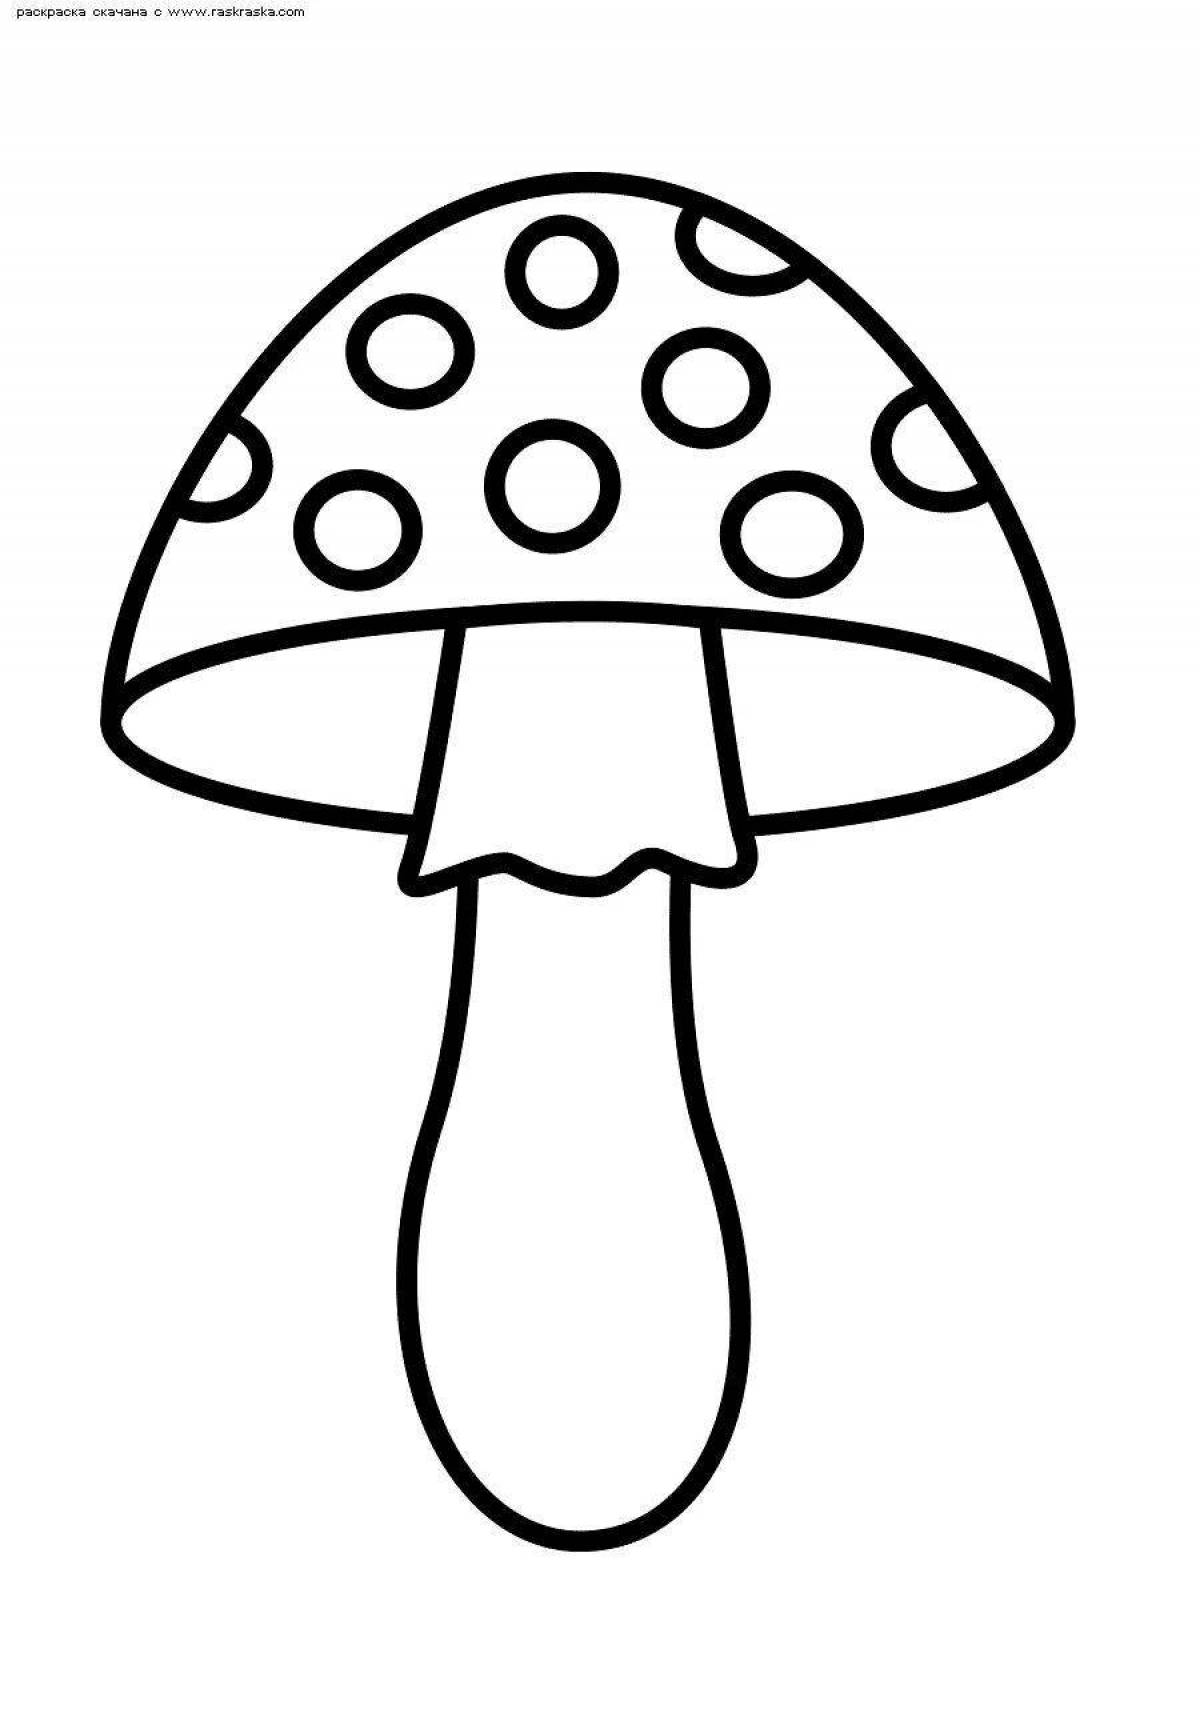 Coloring pages with mushrooms for children 3-4 years old